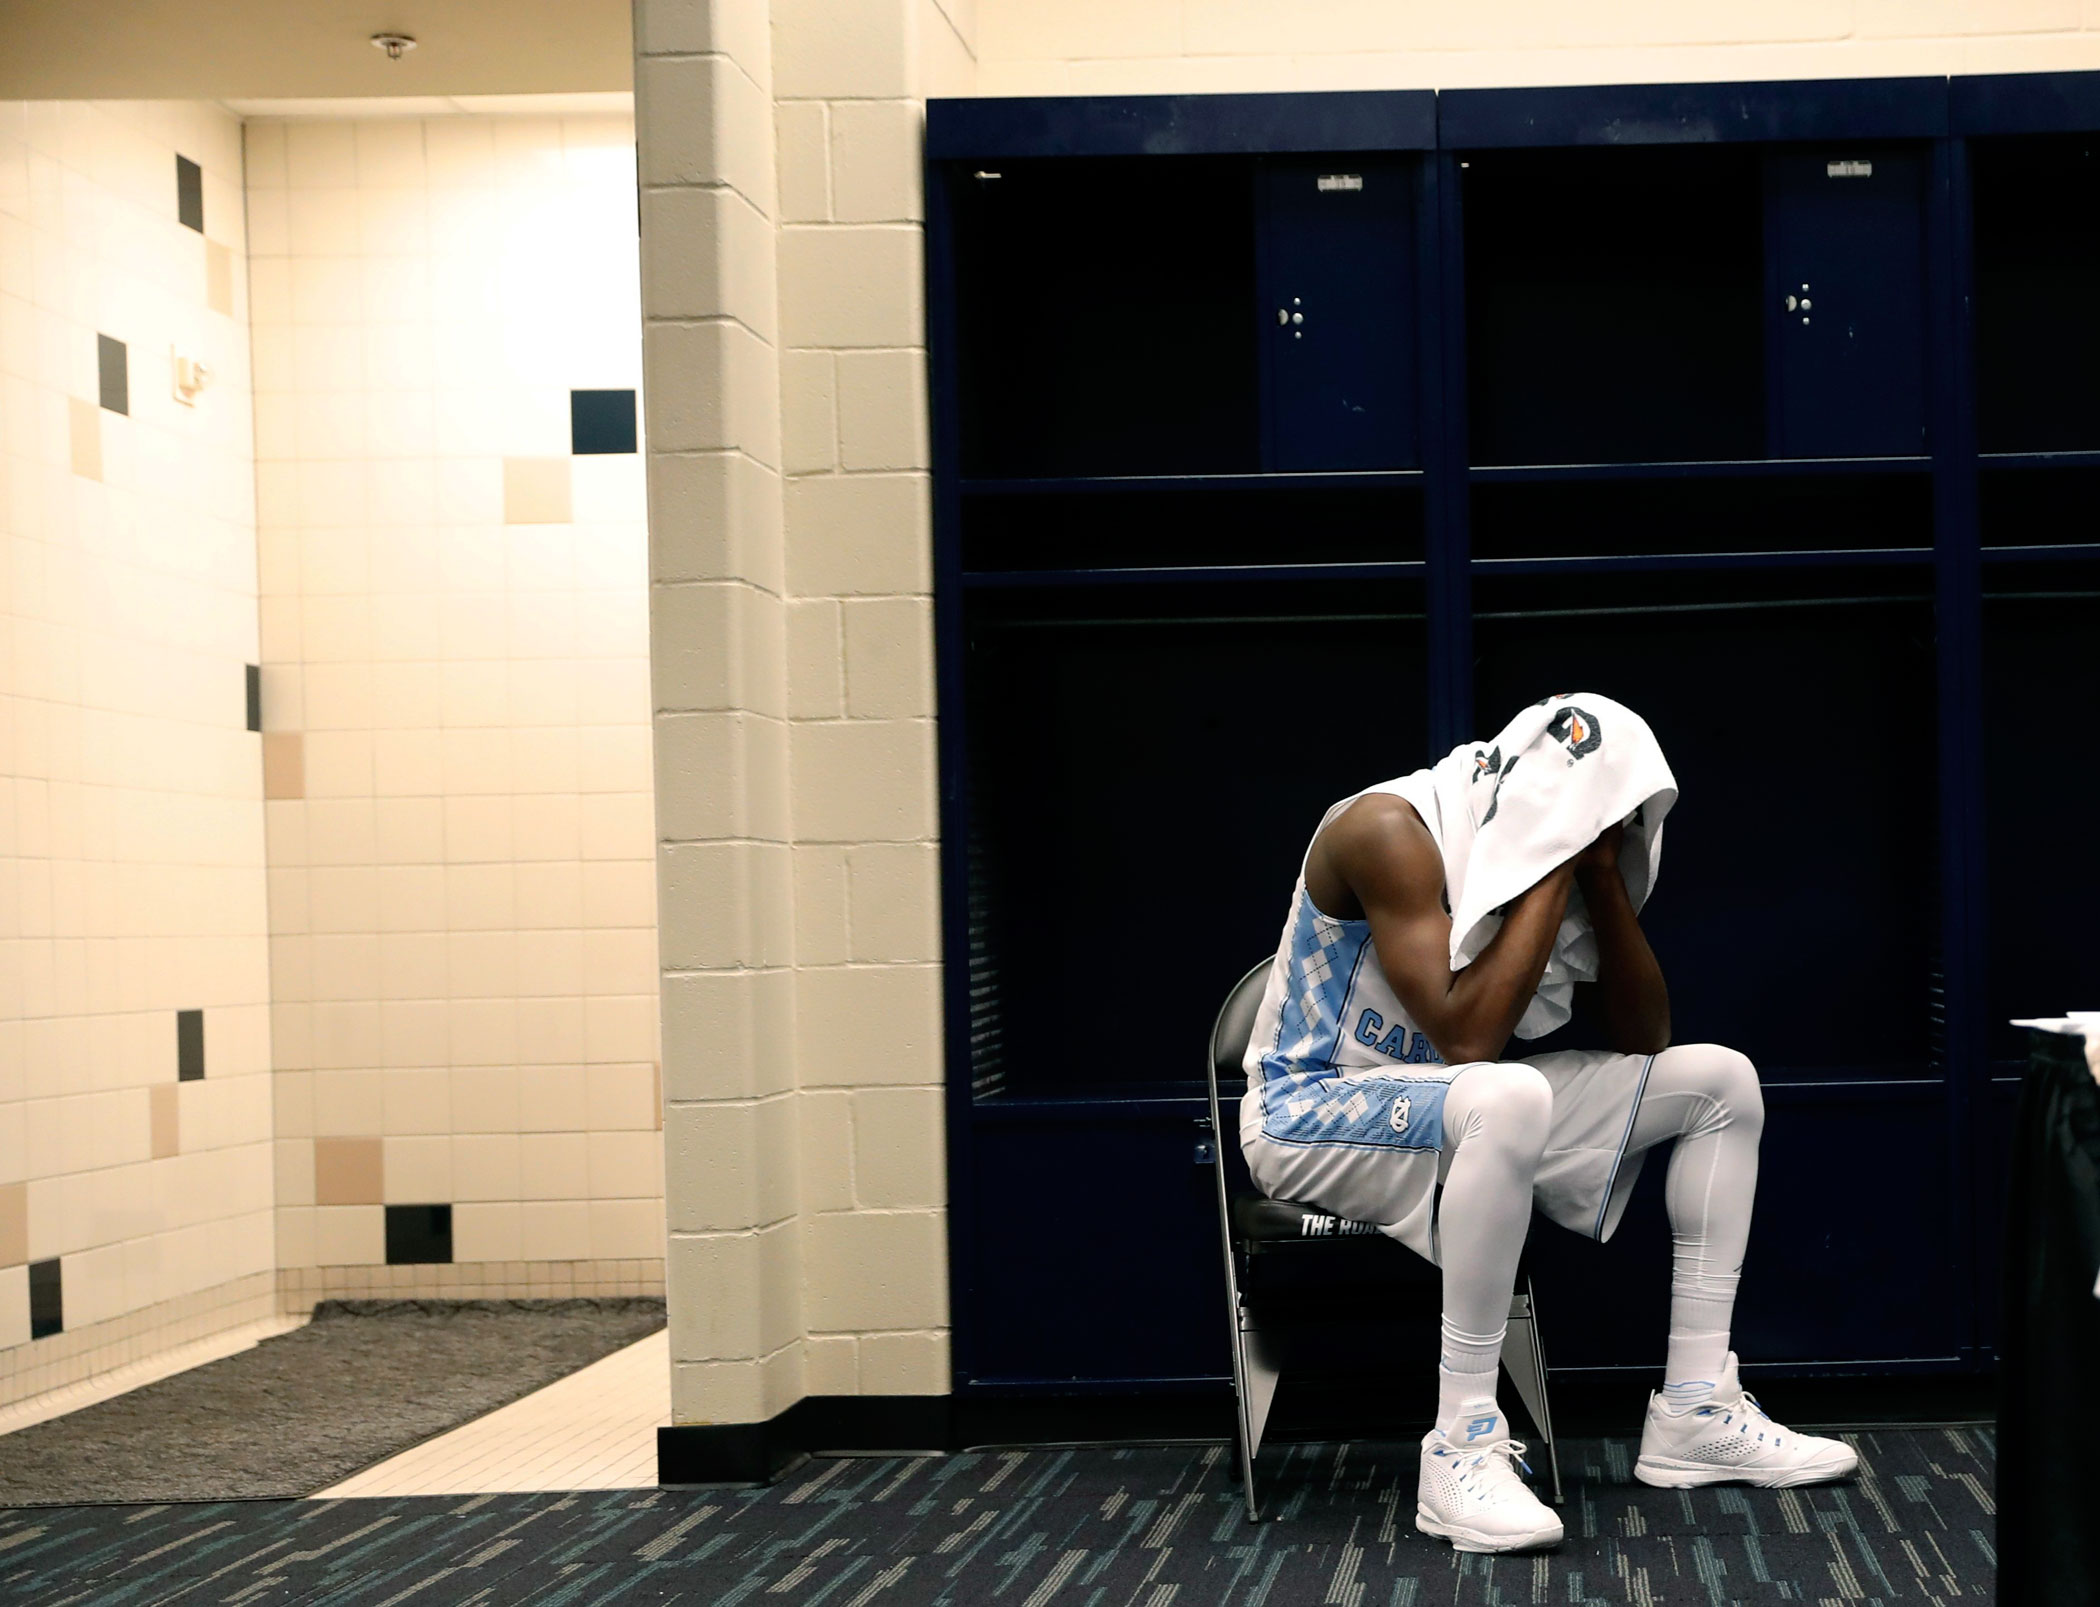 North Carolina's Theo Pinson sits in the locker room after Villanova defeated North Caroline in the NCAA college basketball National Championship game on April 4, 2016 in Houston.